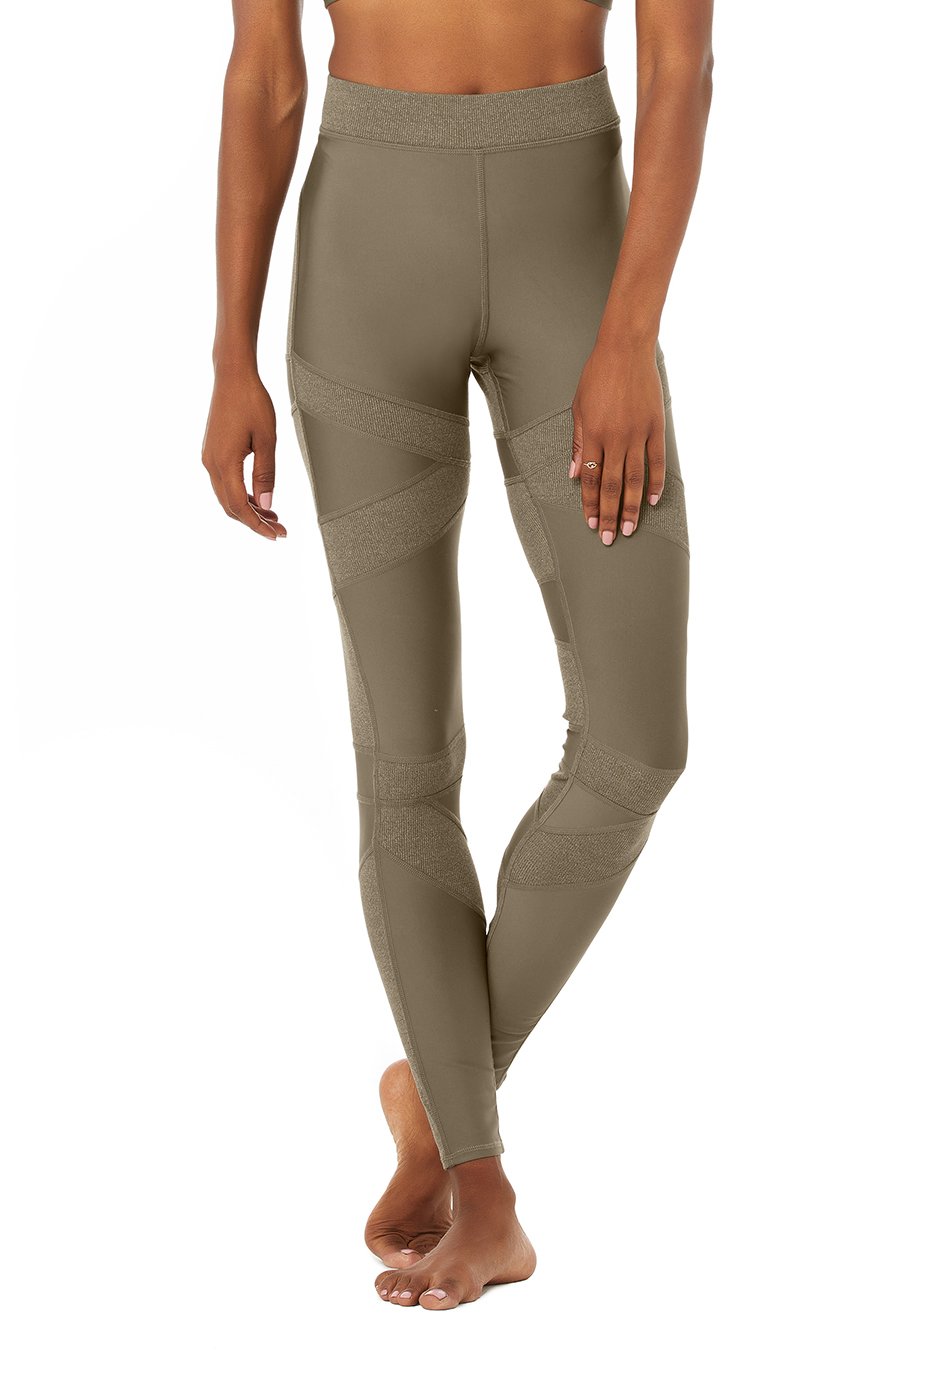 High-Waist Level Up Legging in Olive Branch by Alo Yoga - Ballet for Women